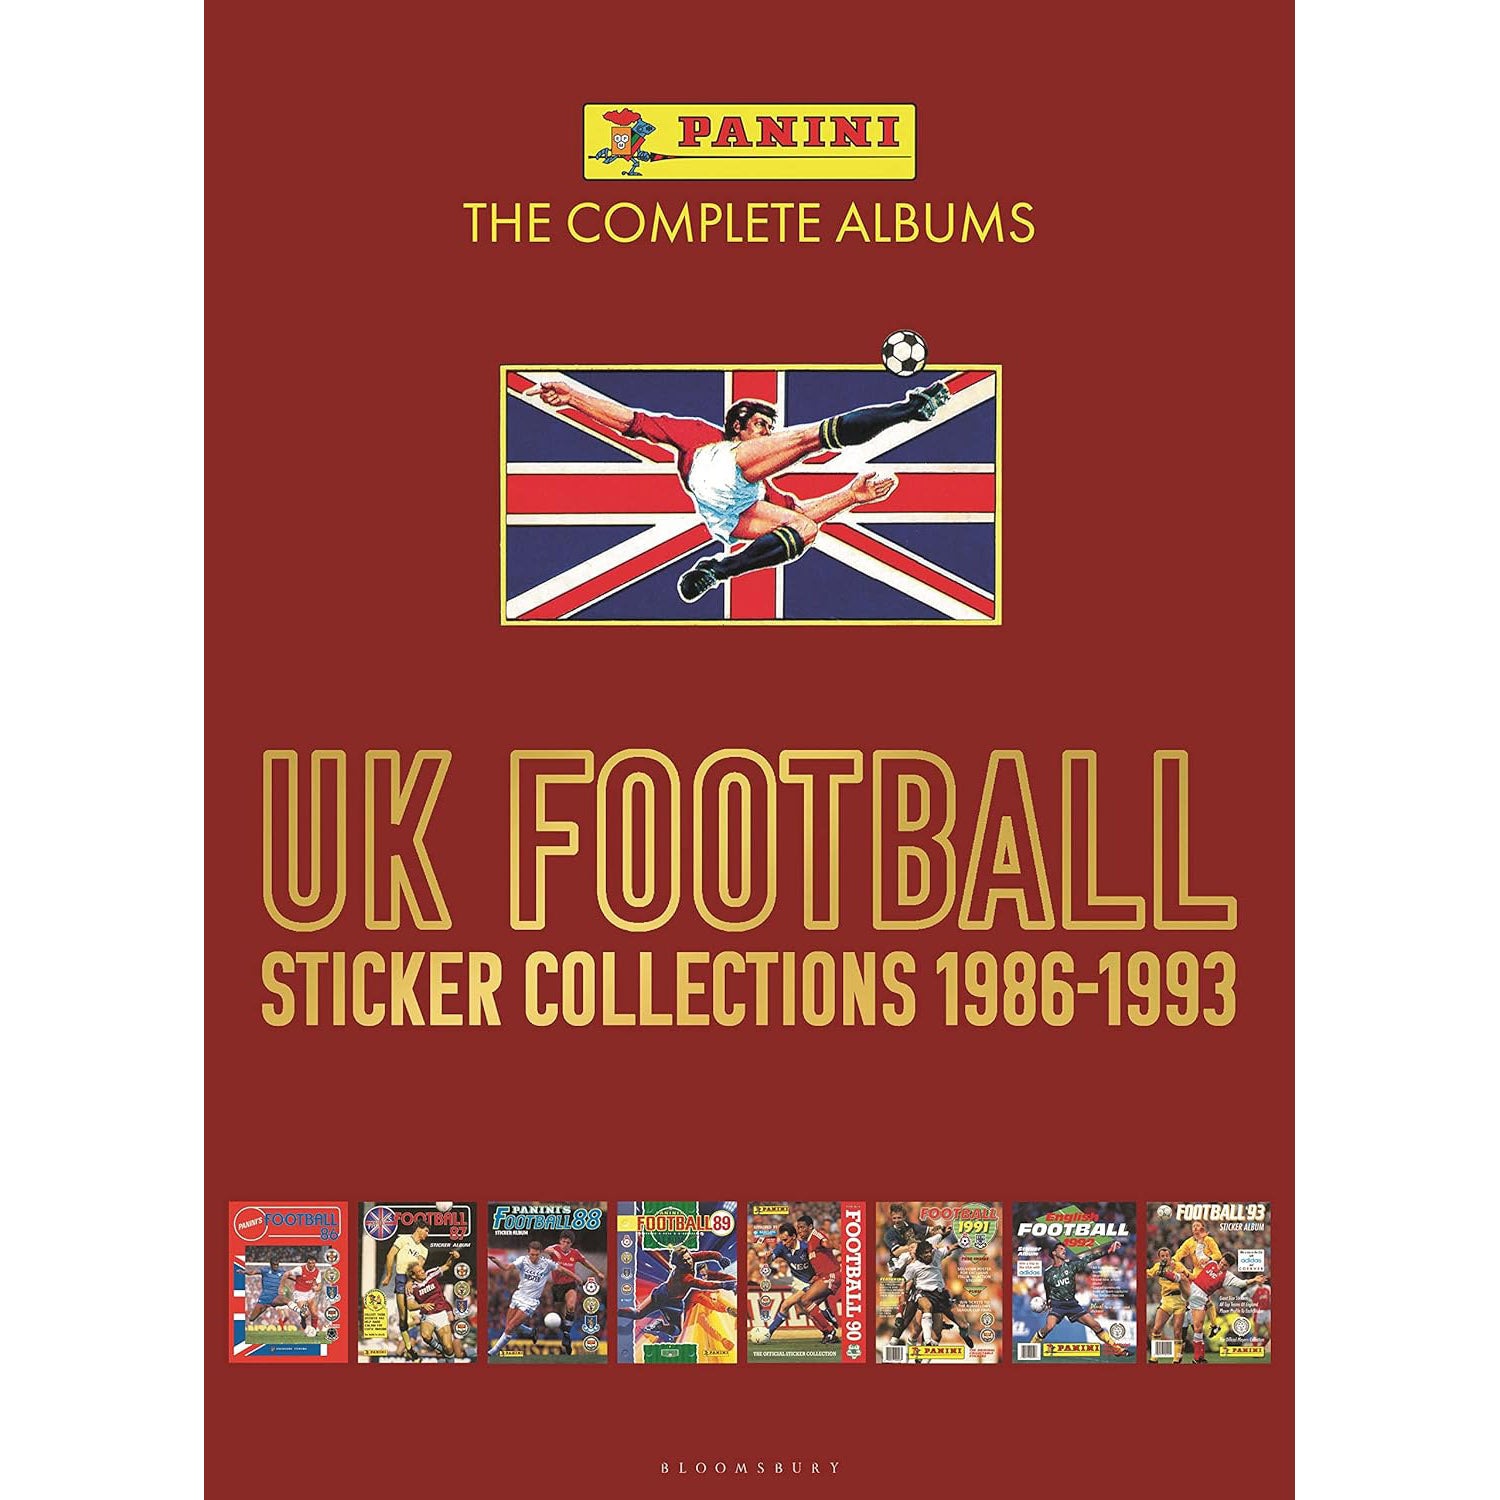 Stickers and Collectibles